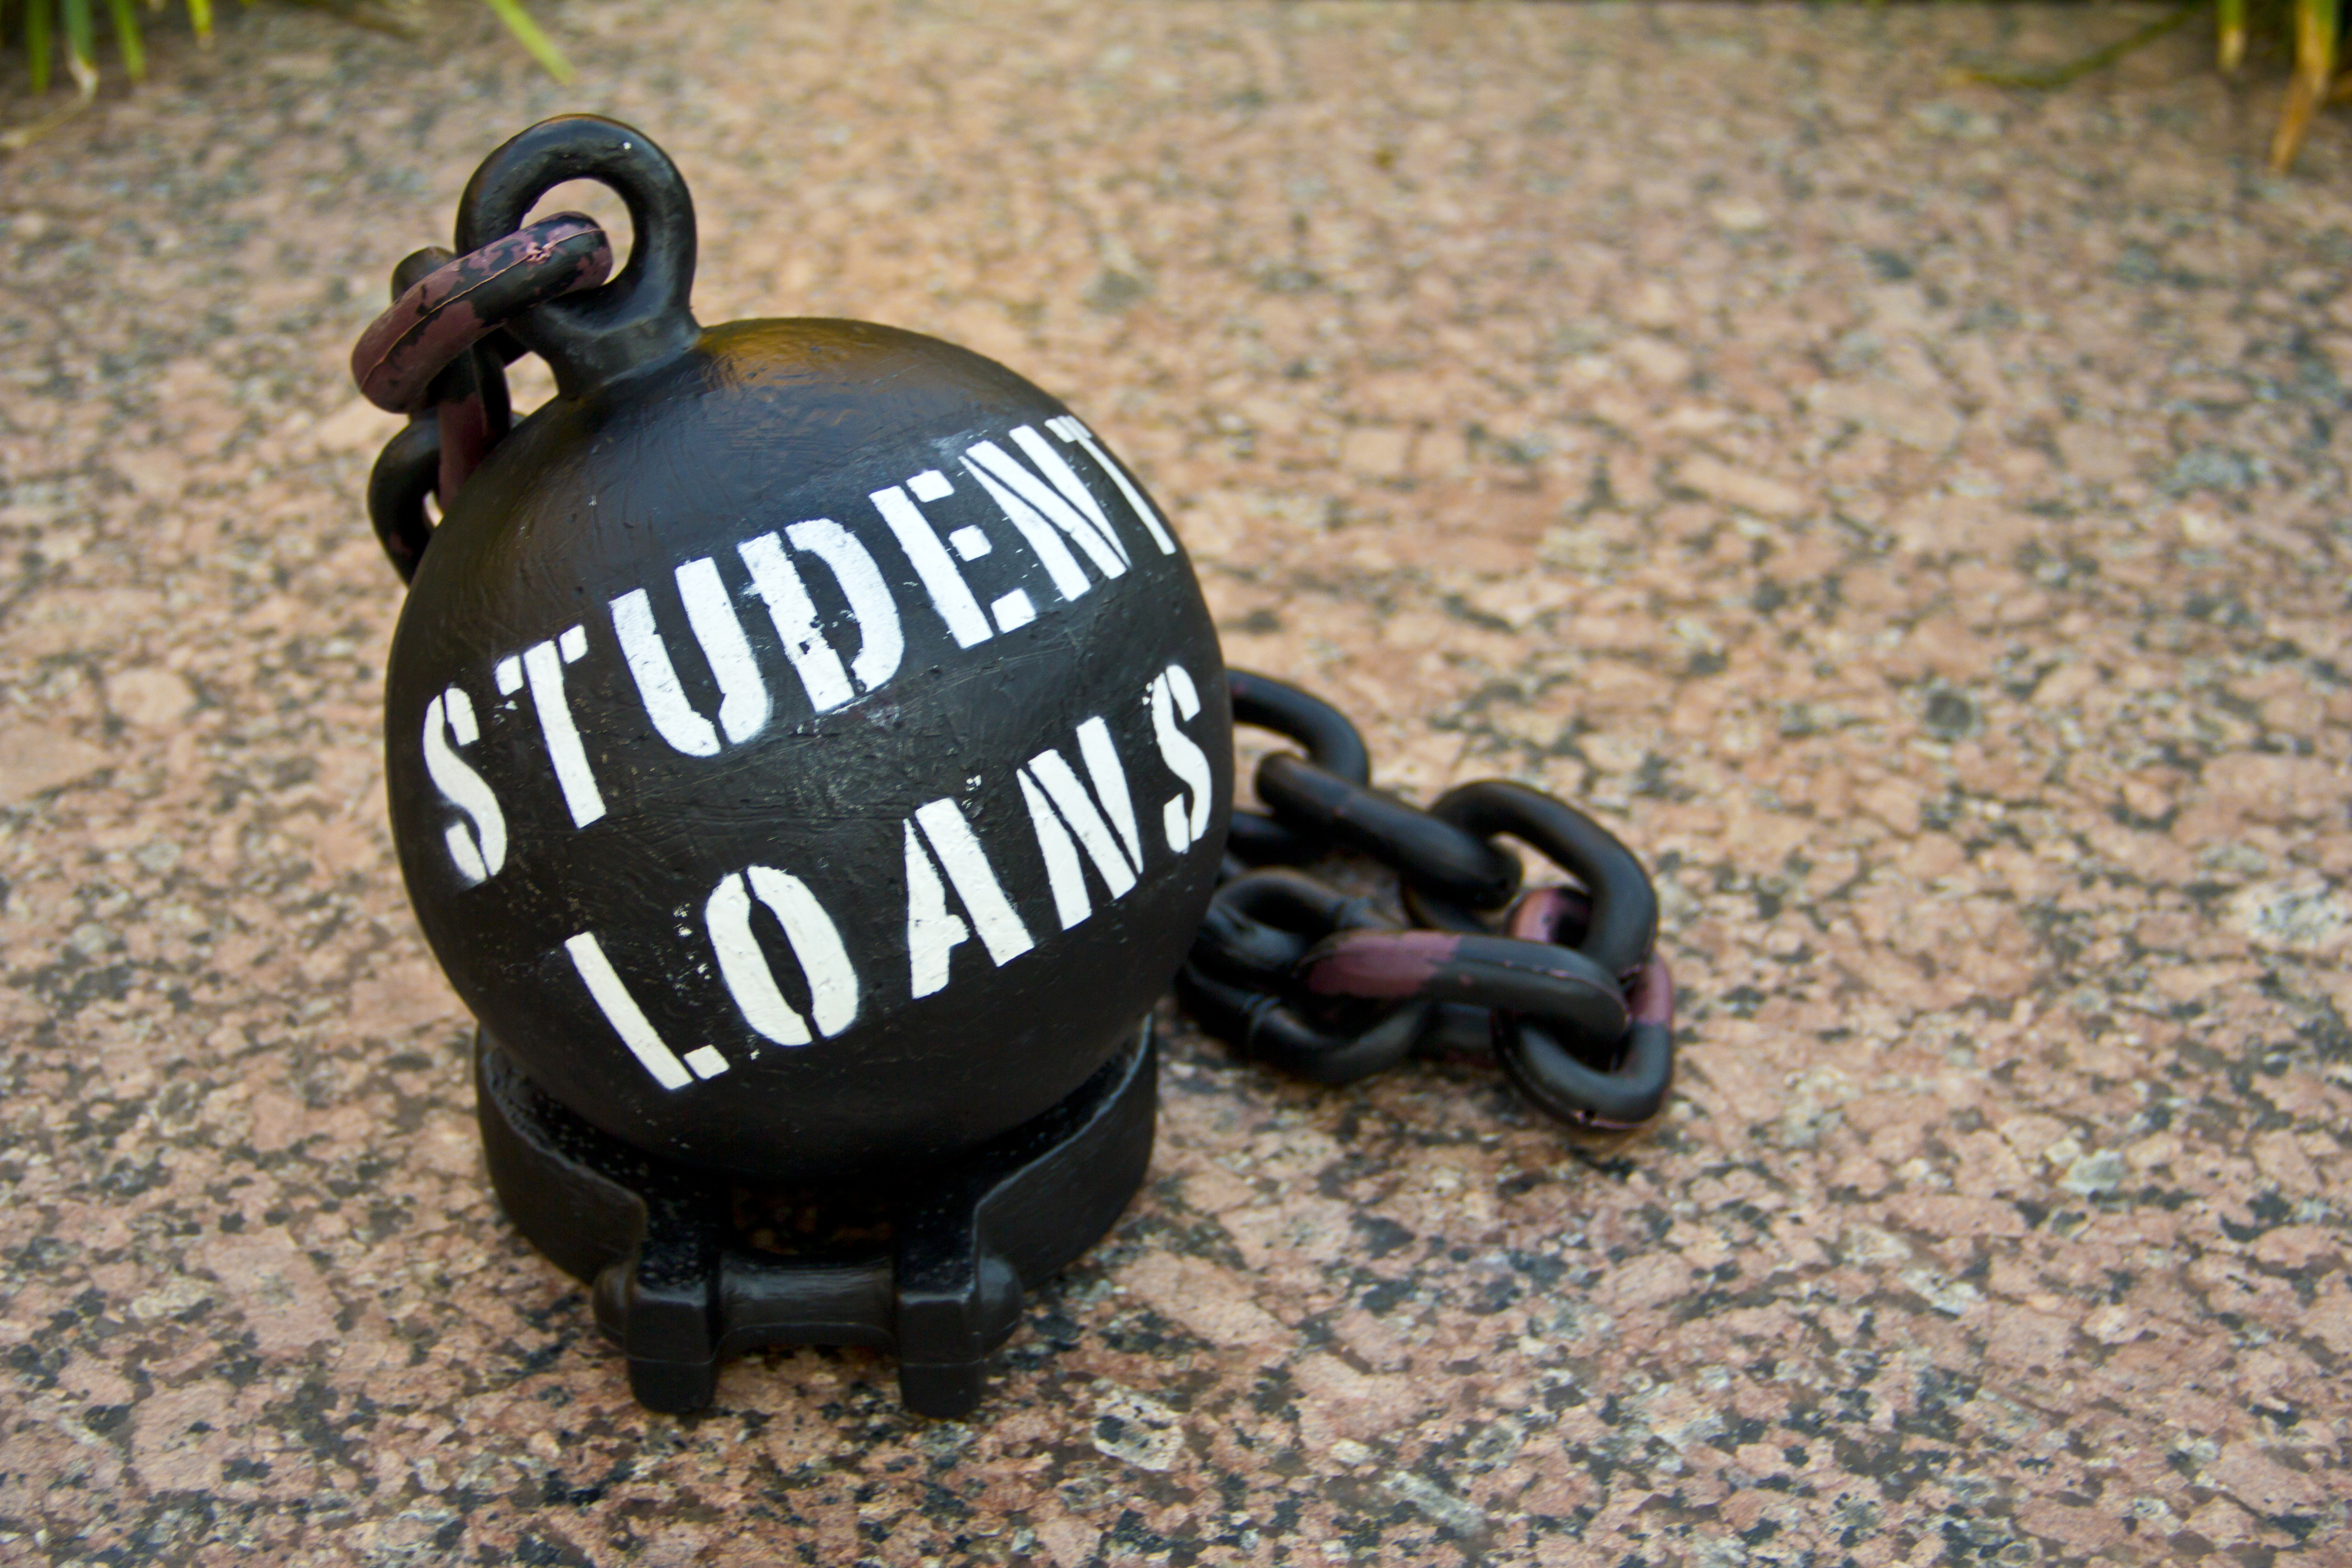 A black ball and chain is emblazoned with the words “STUDENT LOANS.”